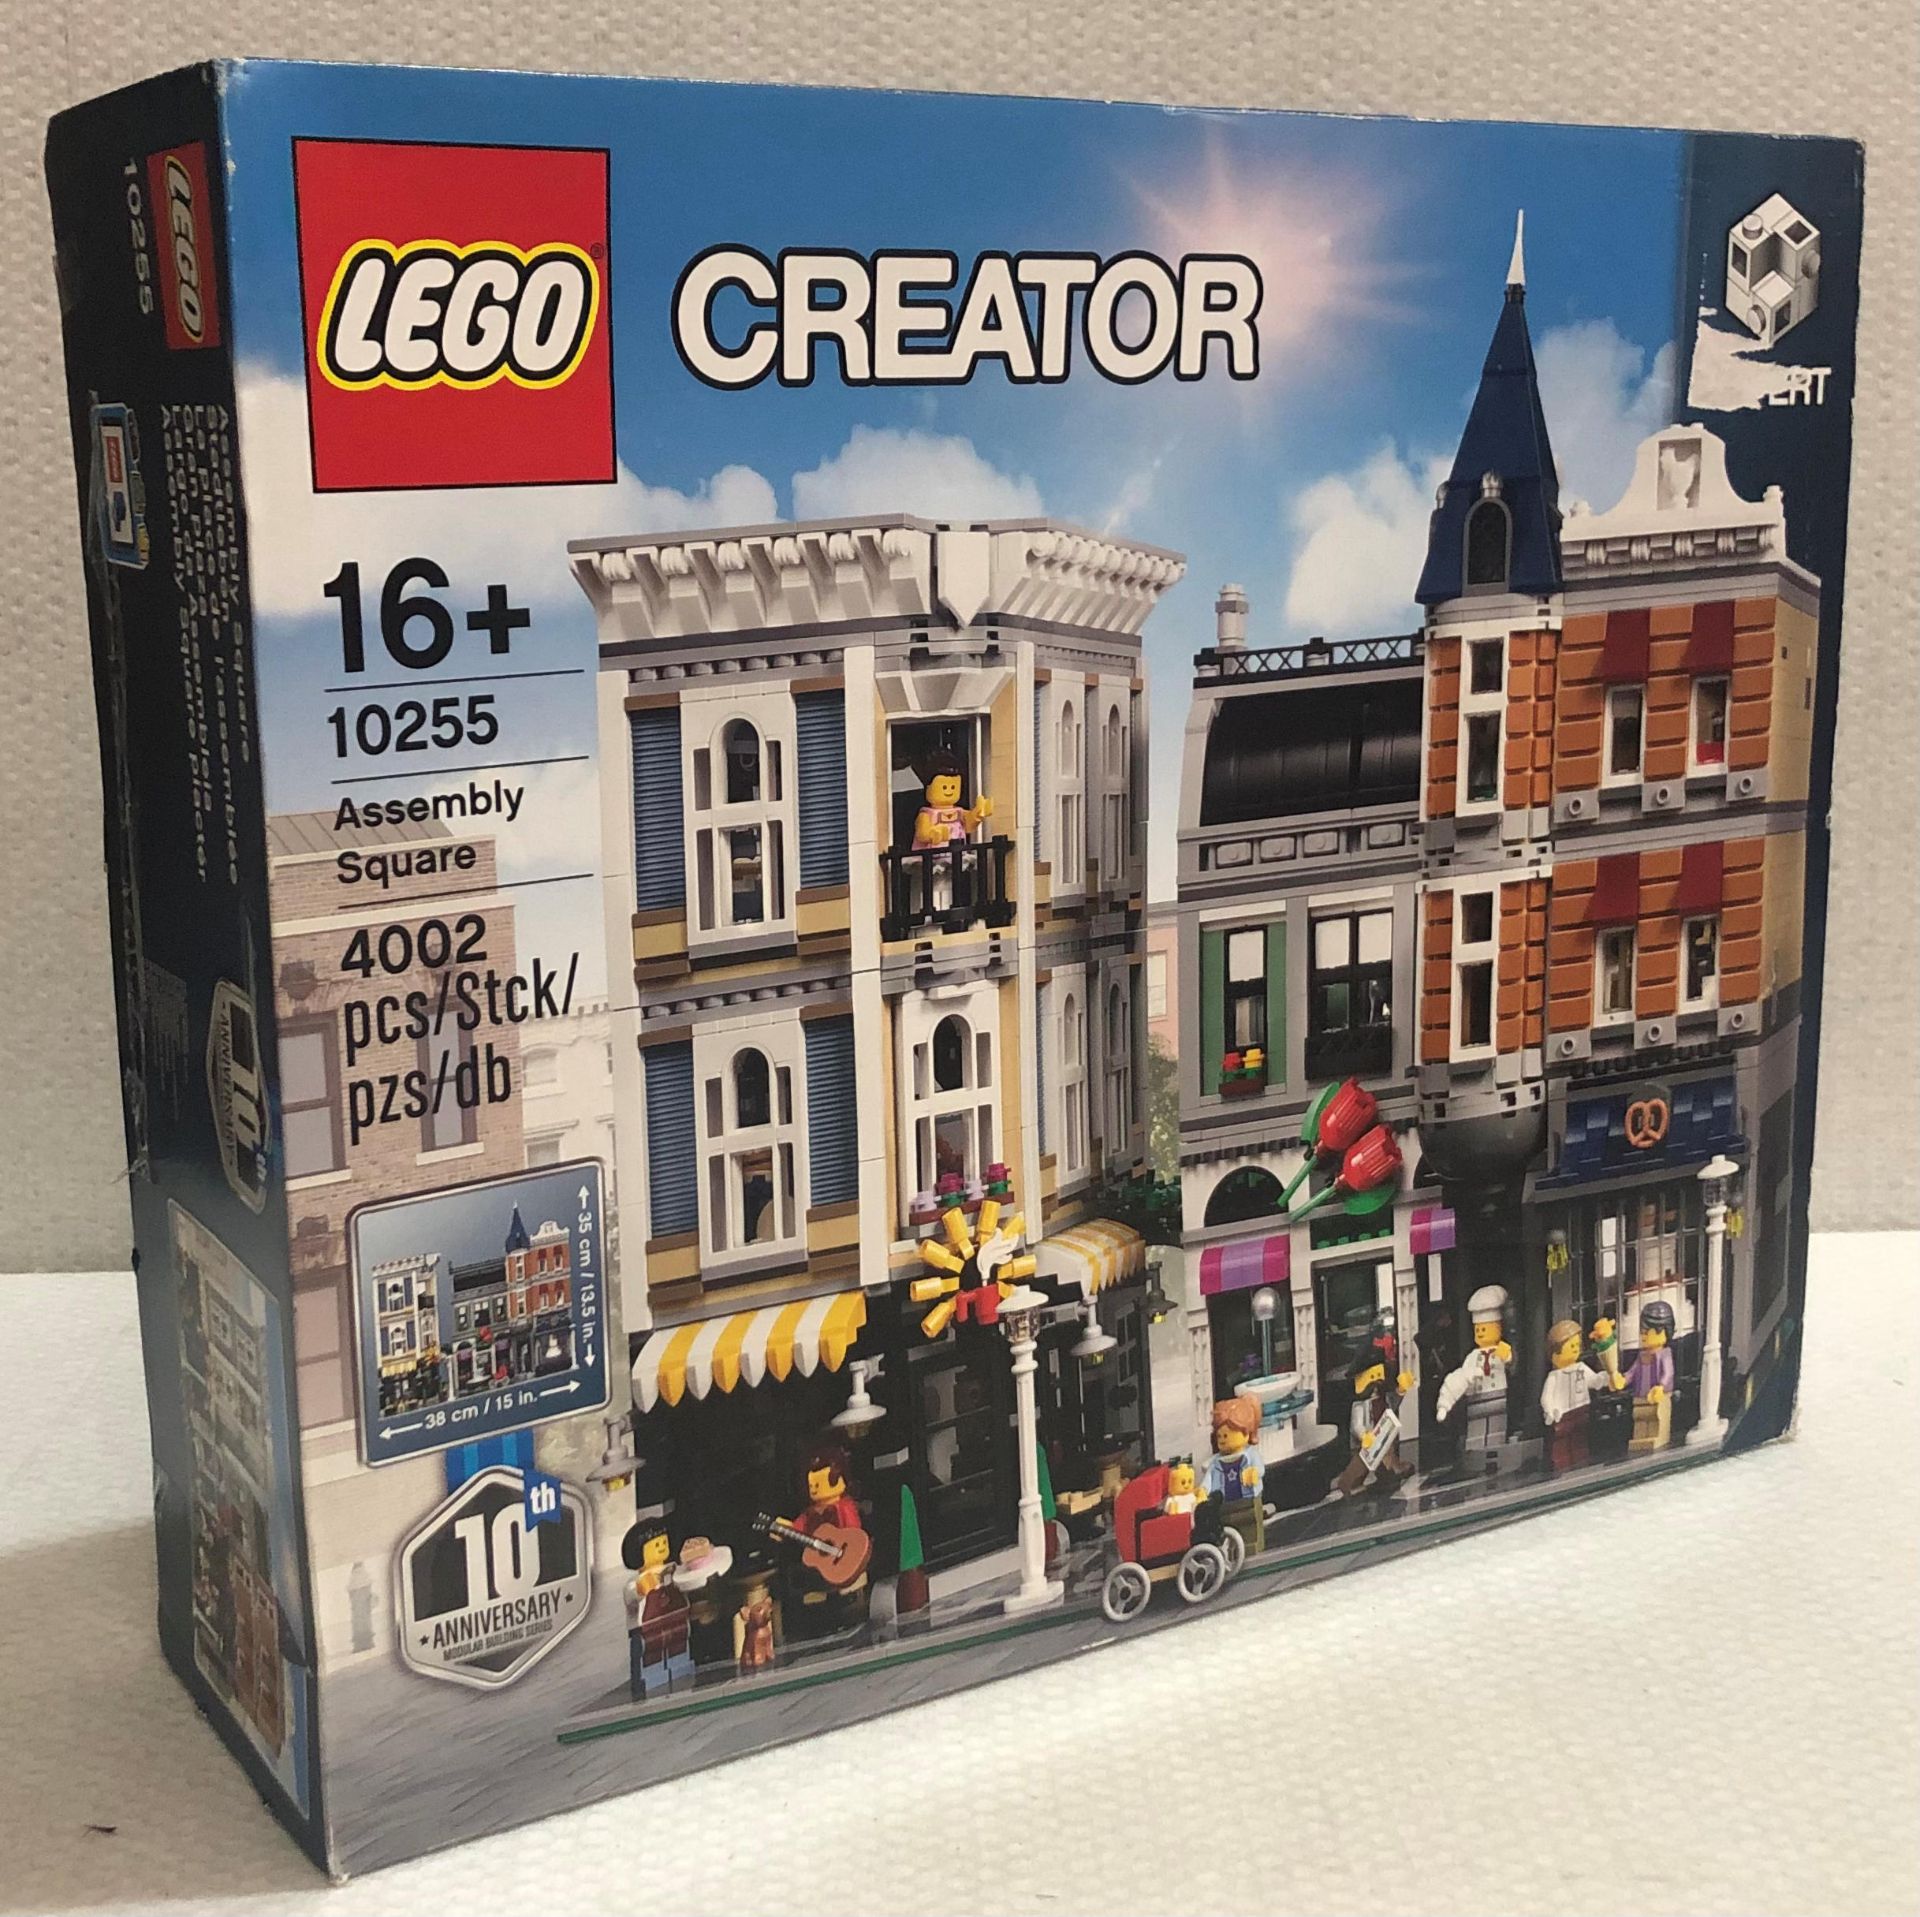 1 x Lego Creator Assembly Square - Set # 10255 - New/Boxed - Image 3 of 6